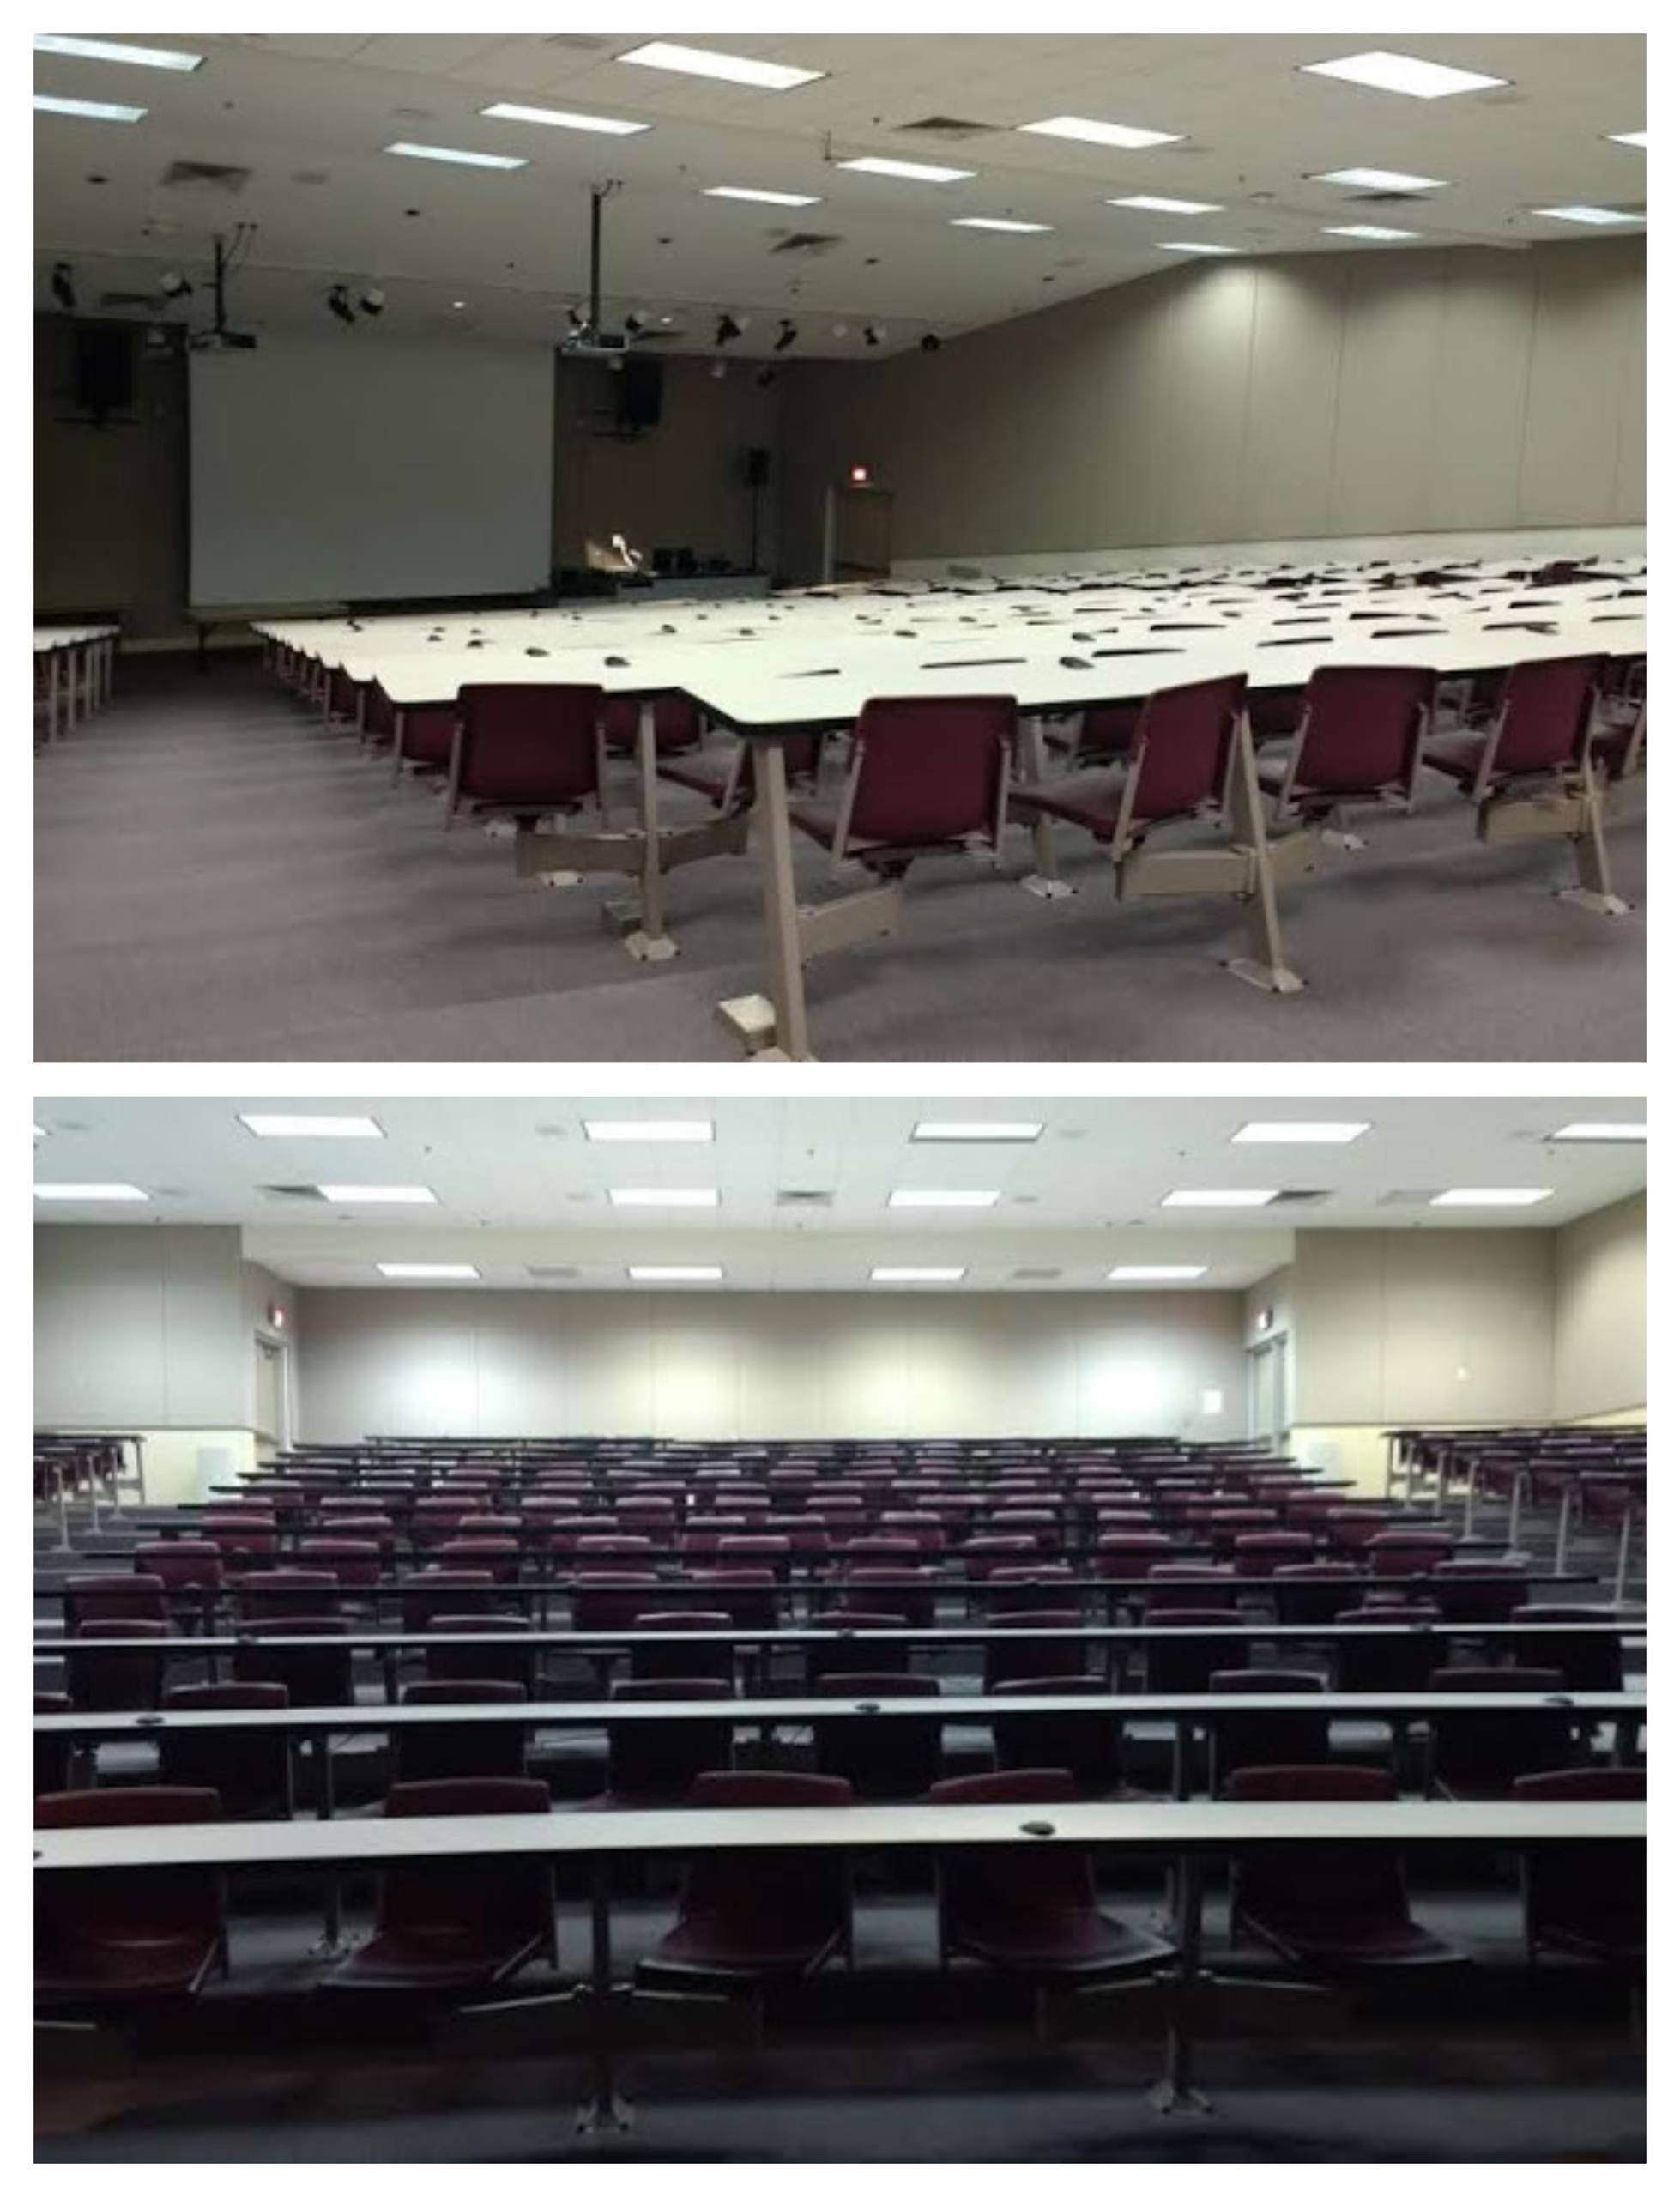 Olscamp Room 113 Front & Back View 